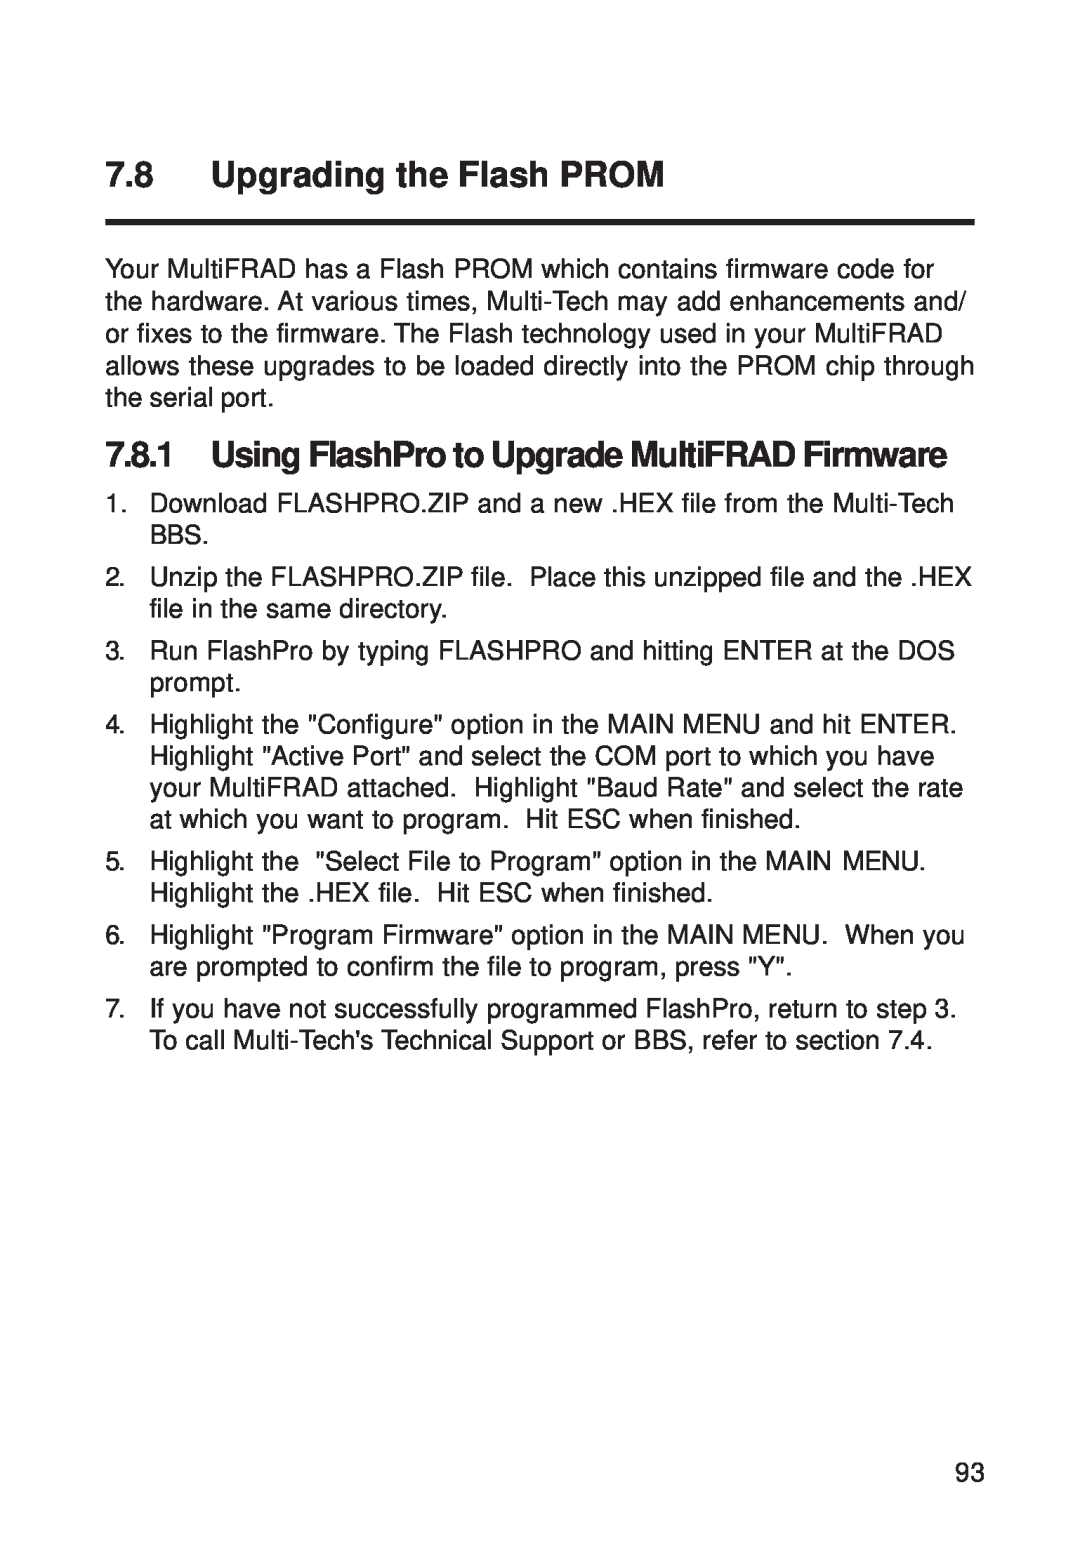 Multi-Tech Systems FR111 owner manual Upgrading the Flash PROM, Using FlashPro to Upgrade MultiFRAD Firmware 